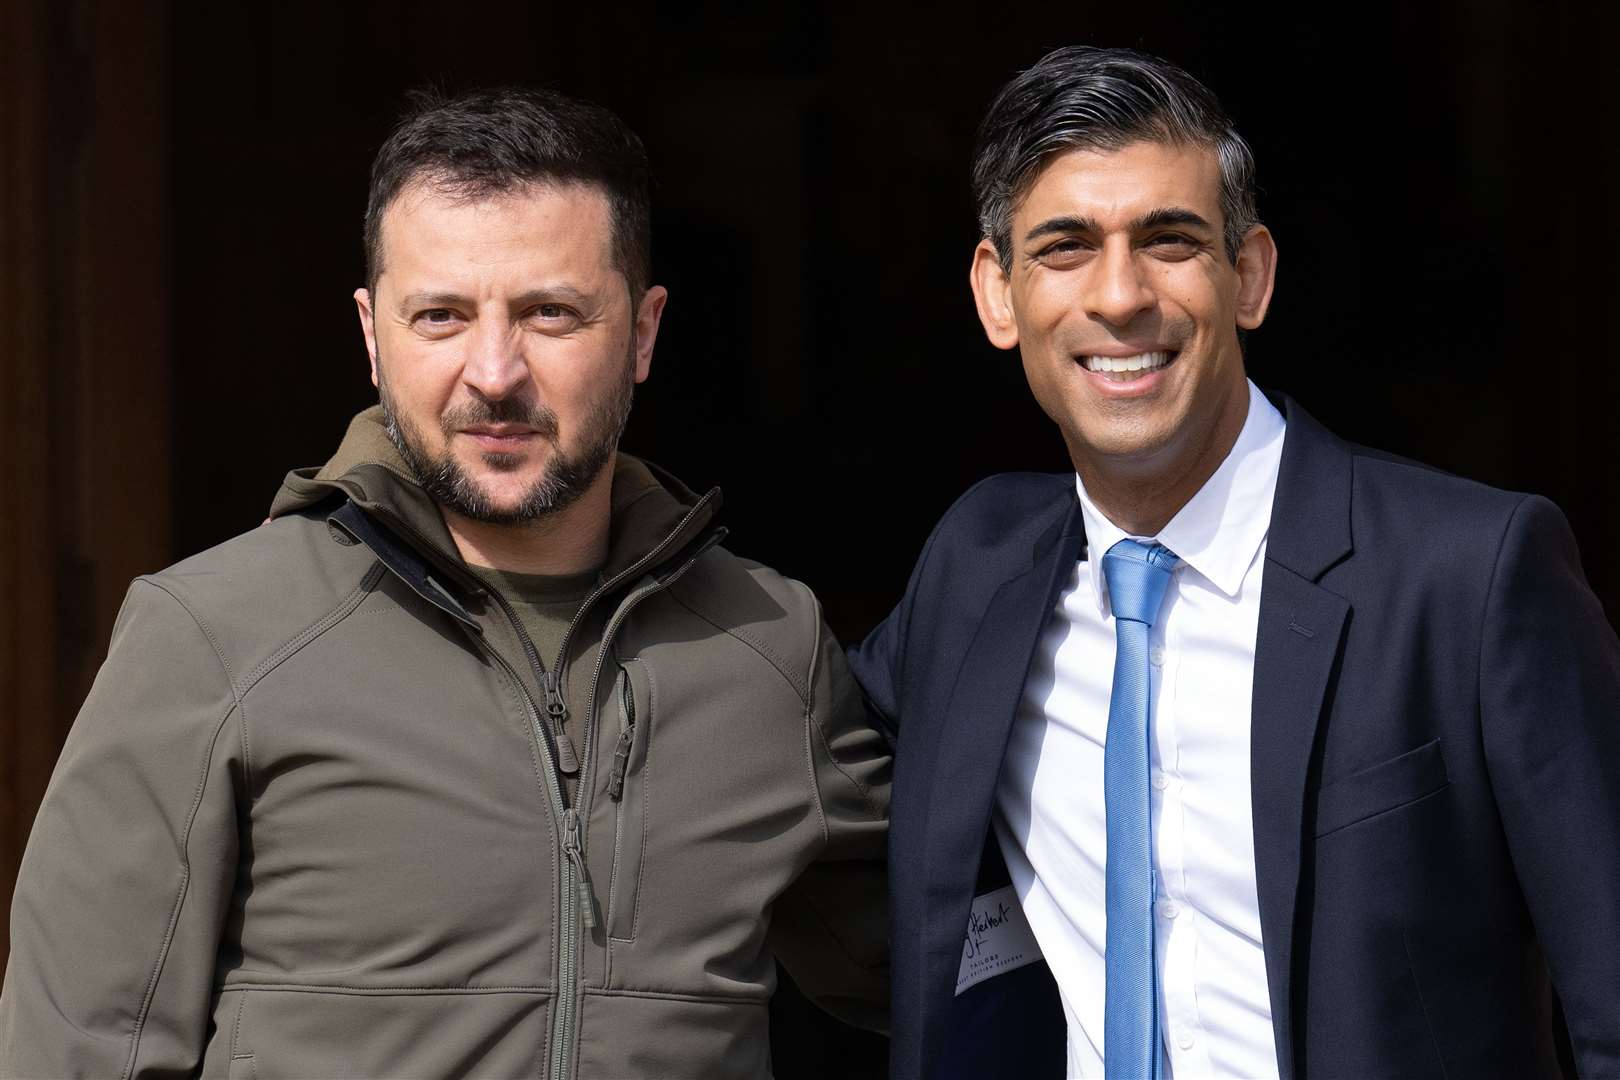 Prime Minister Rishi Sunak pictured during a meeting Ukrainian President Volodymyr Zelensky at Chequers in Buckinghamshire (Carl Court/PA)